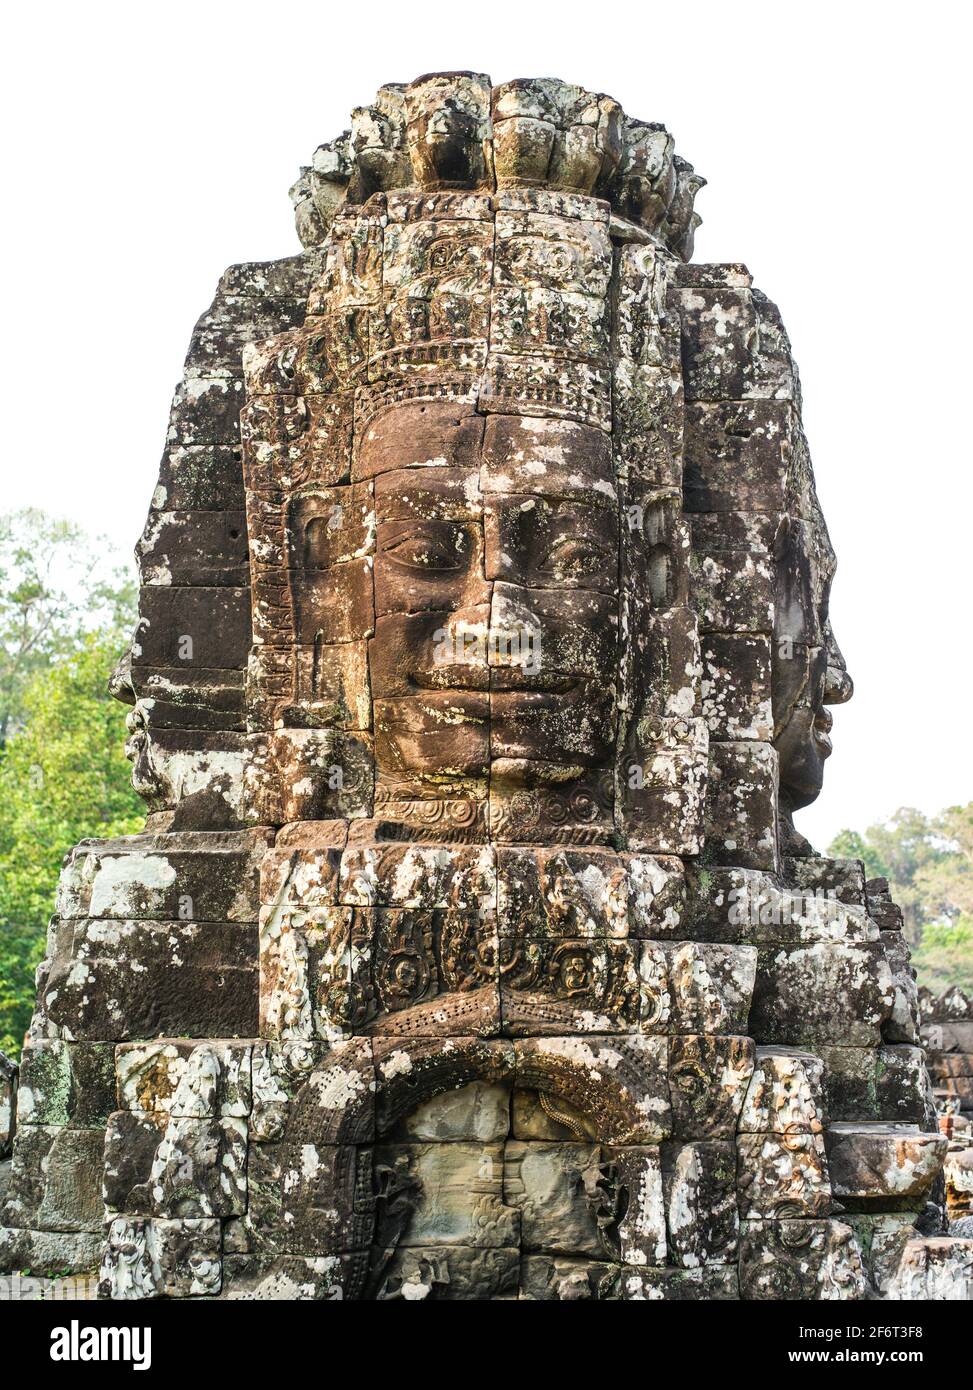 The Bayon is a well-known and richly decorated Khmer temple at Angkor in Cambodia. Built in the late 12th century or early 13th century as the Stock Photo